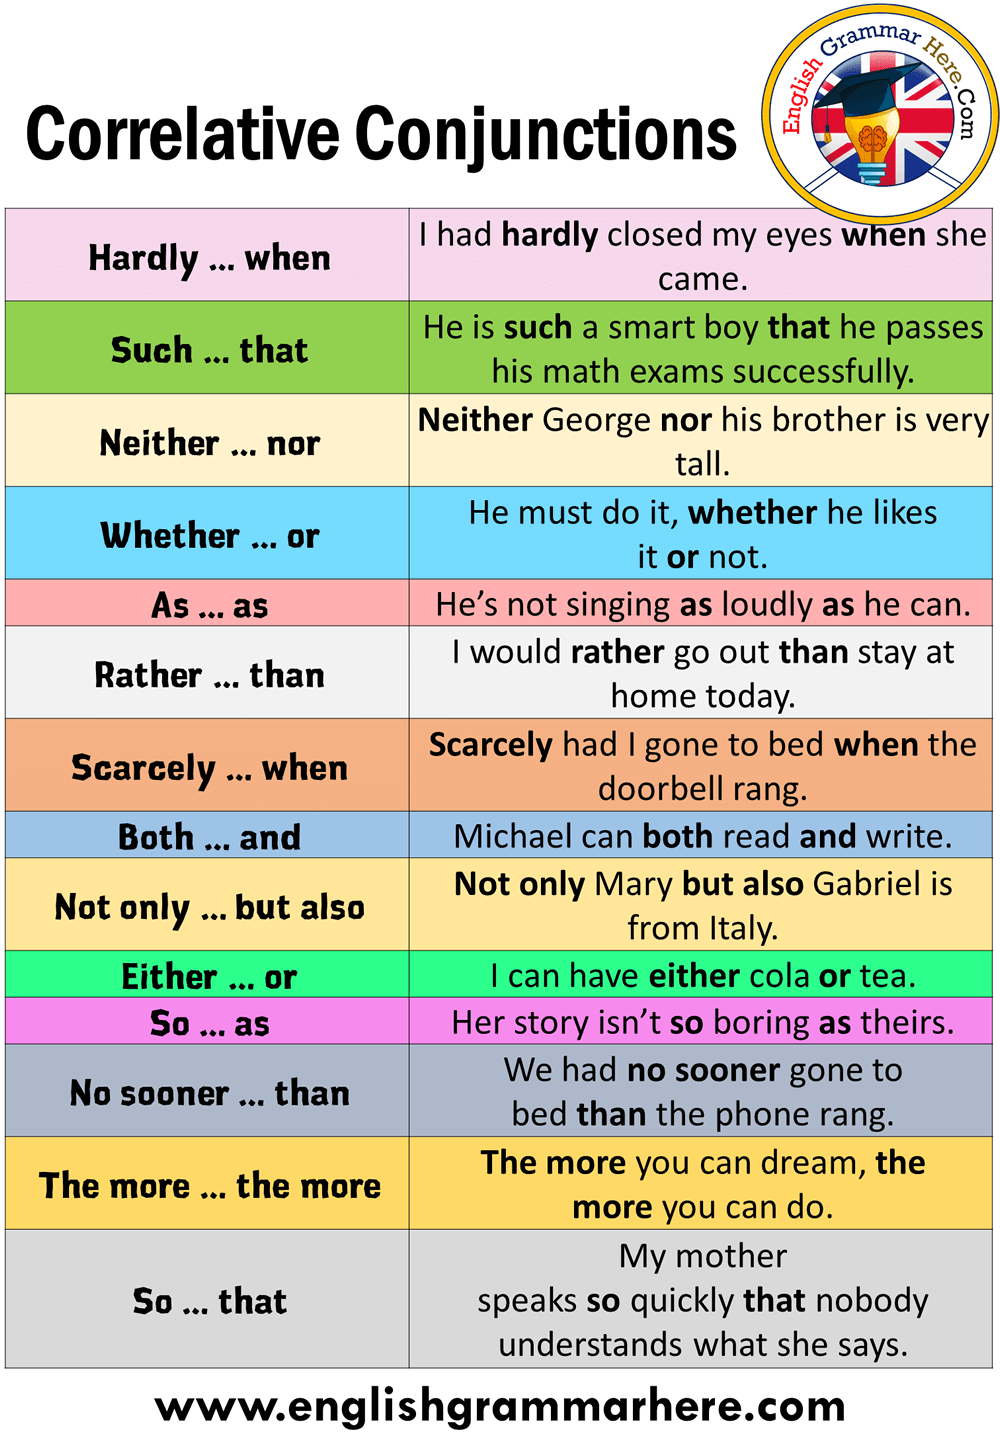 Correlative Conjunctions List and Example Sentences - English Grammar Here